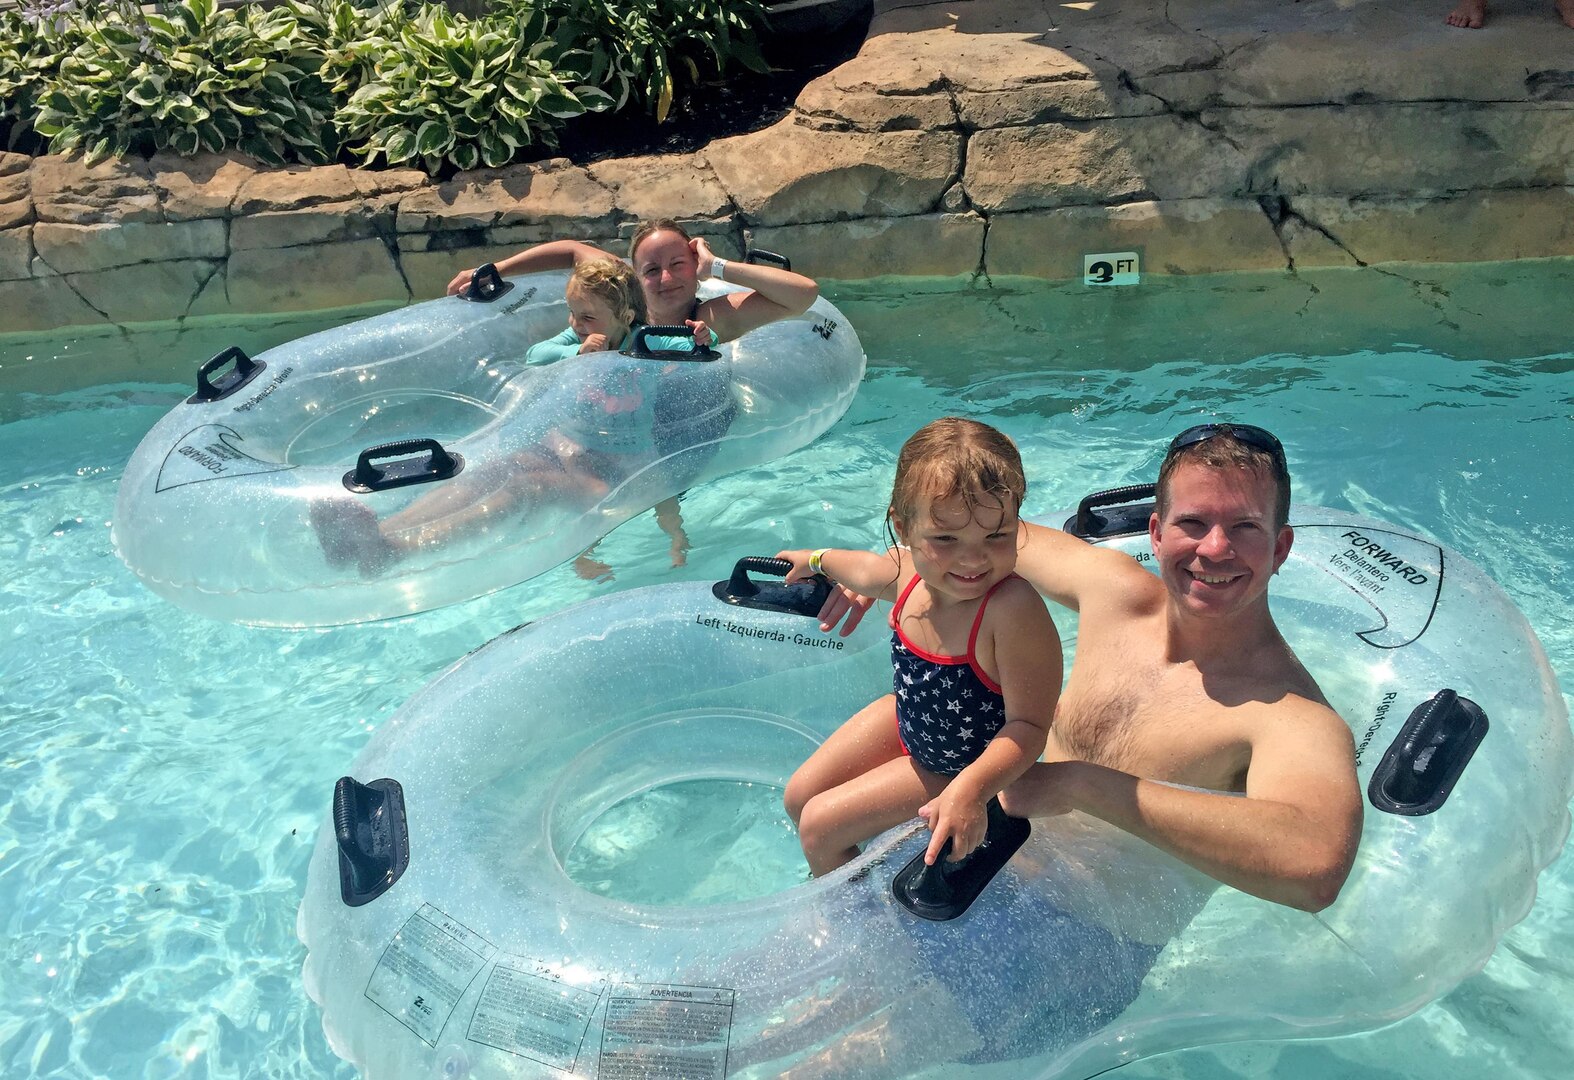 Mike Tuttle, public affairs specialist, and his daughter, Sara, 3, ride the lazy river in Wildwood, New Jersey during DLA Troop Support’s Family Day July 7. Thousands of employees and their guests spent the day at water parks and on amusement rides during the annual gathering.